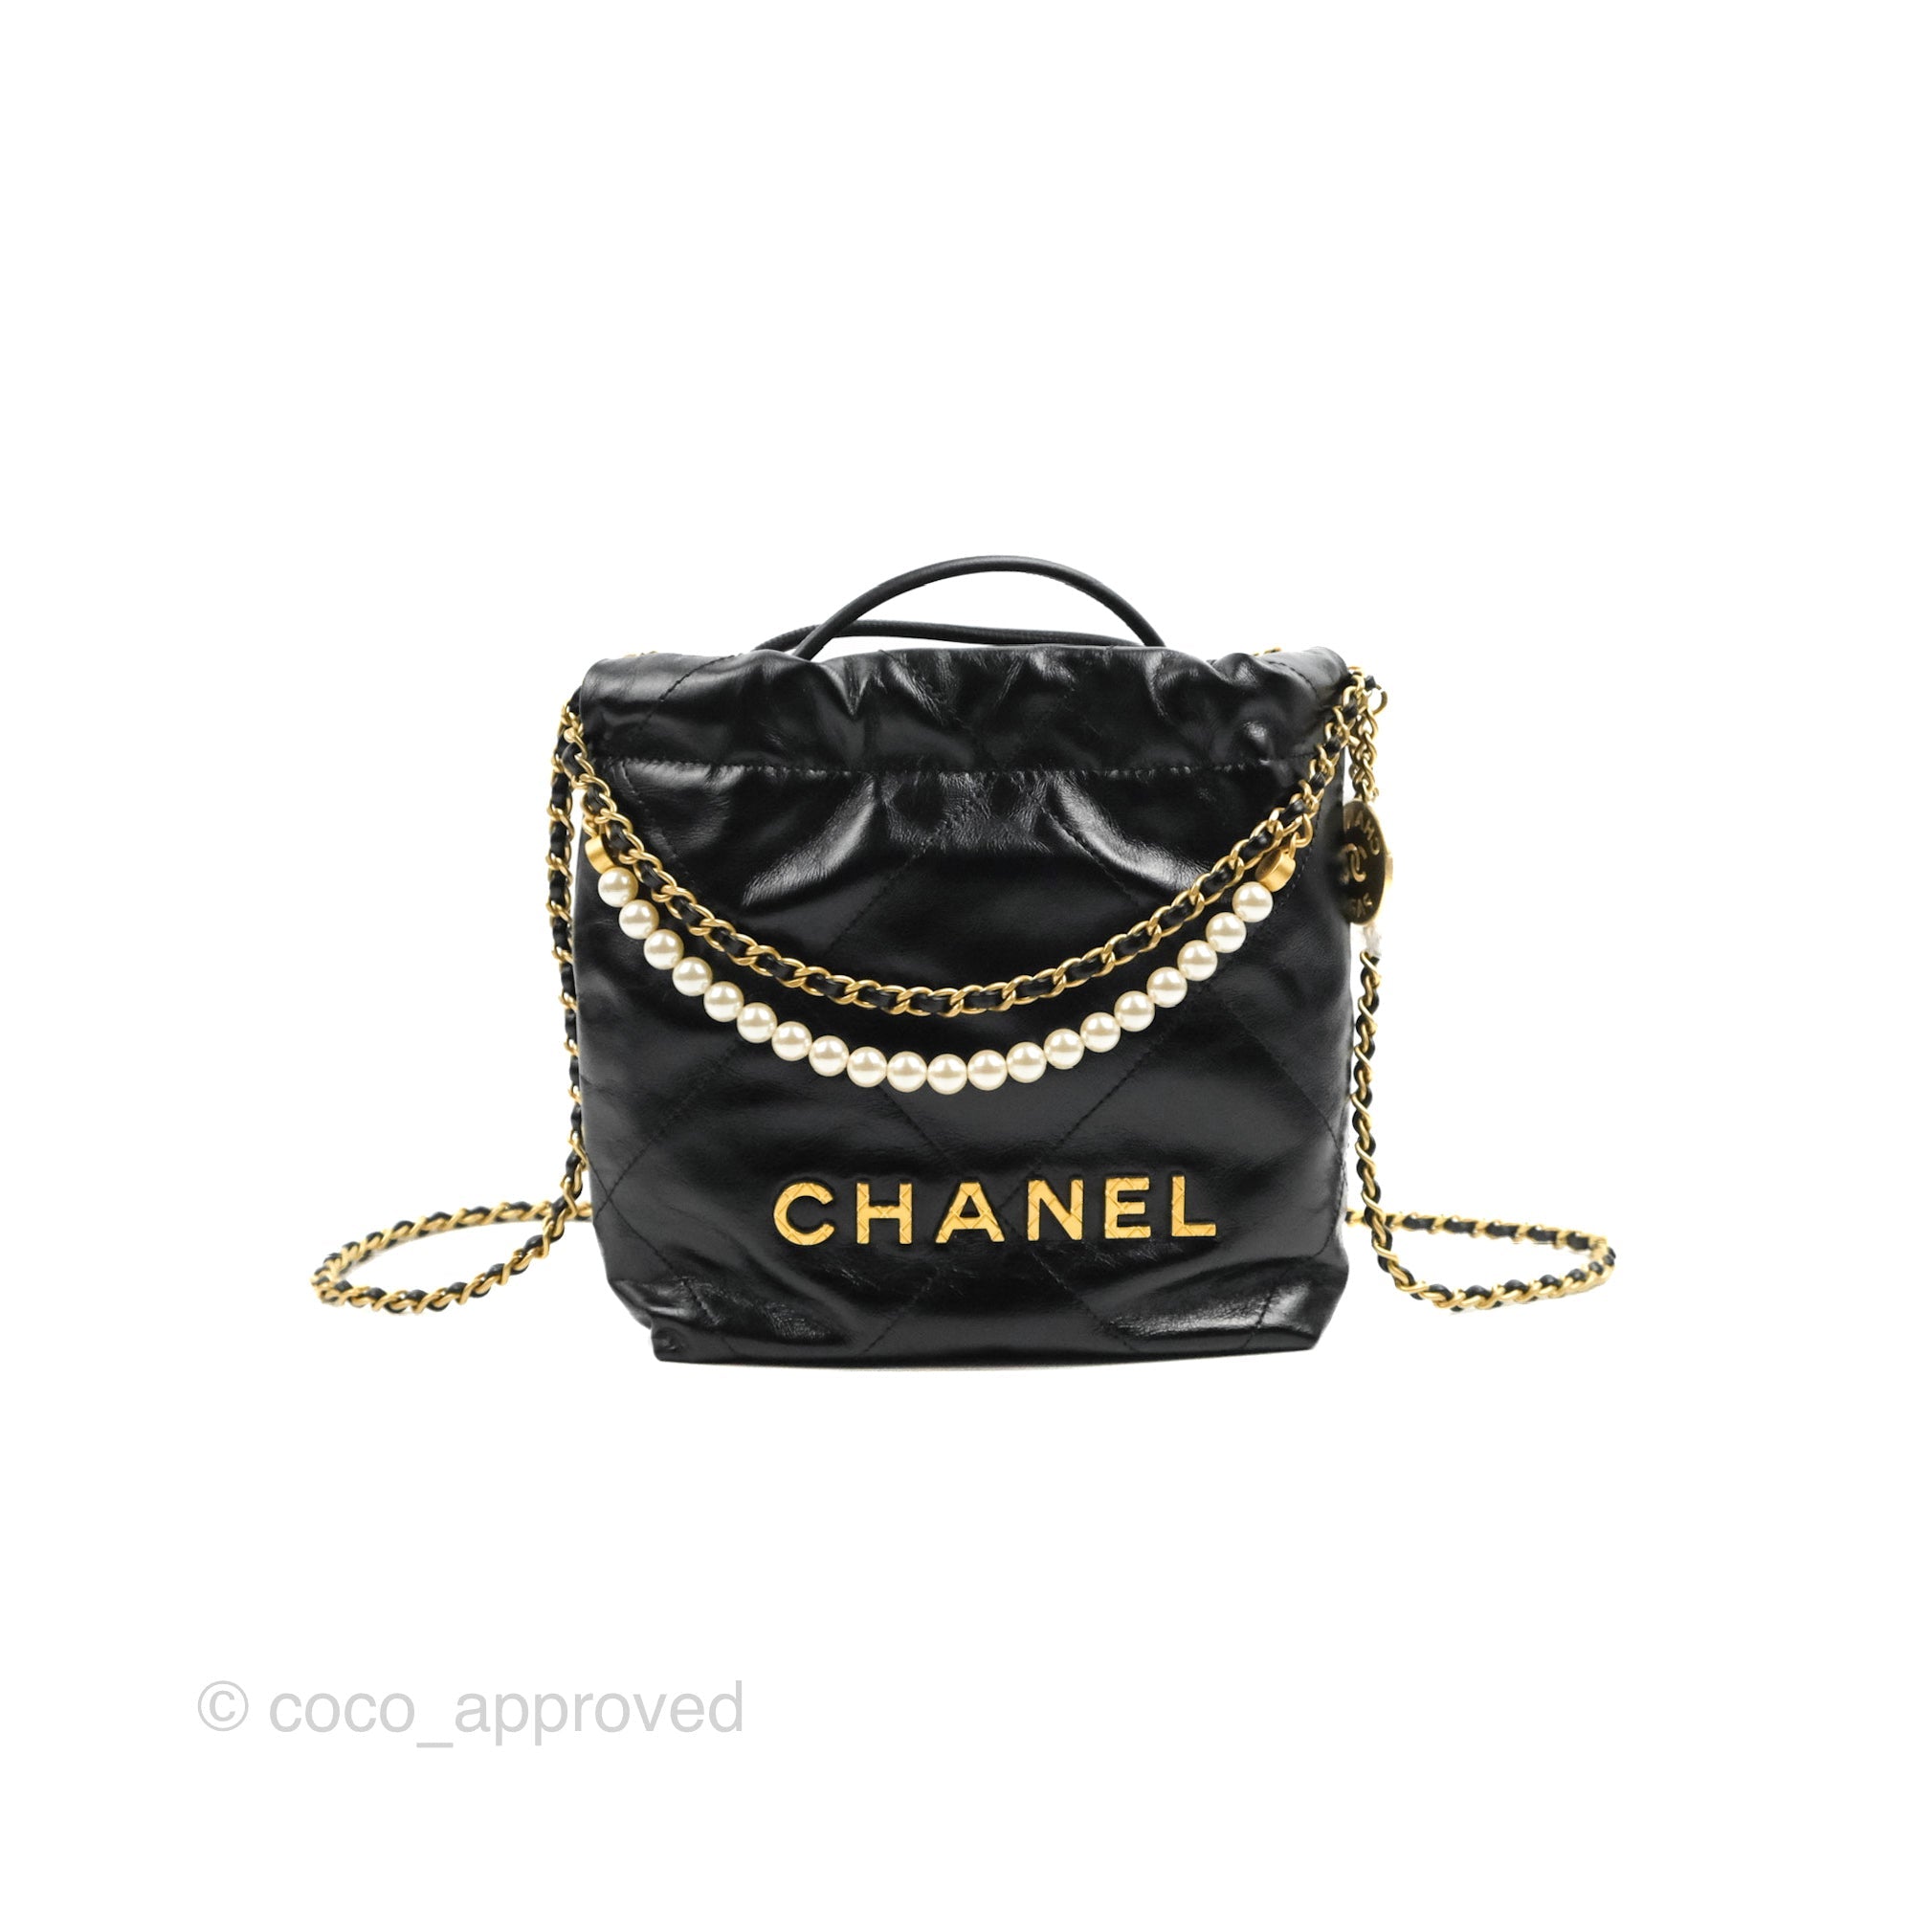 CHANEL Black 90s Theme Bags & Handbags for Women, Authenticity Guaranteed